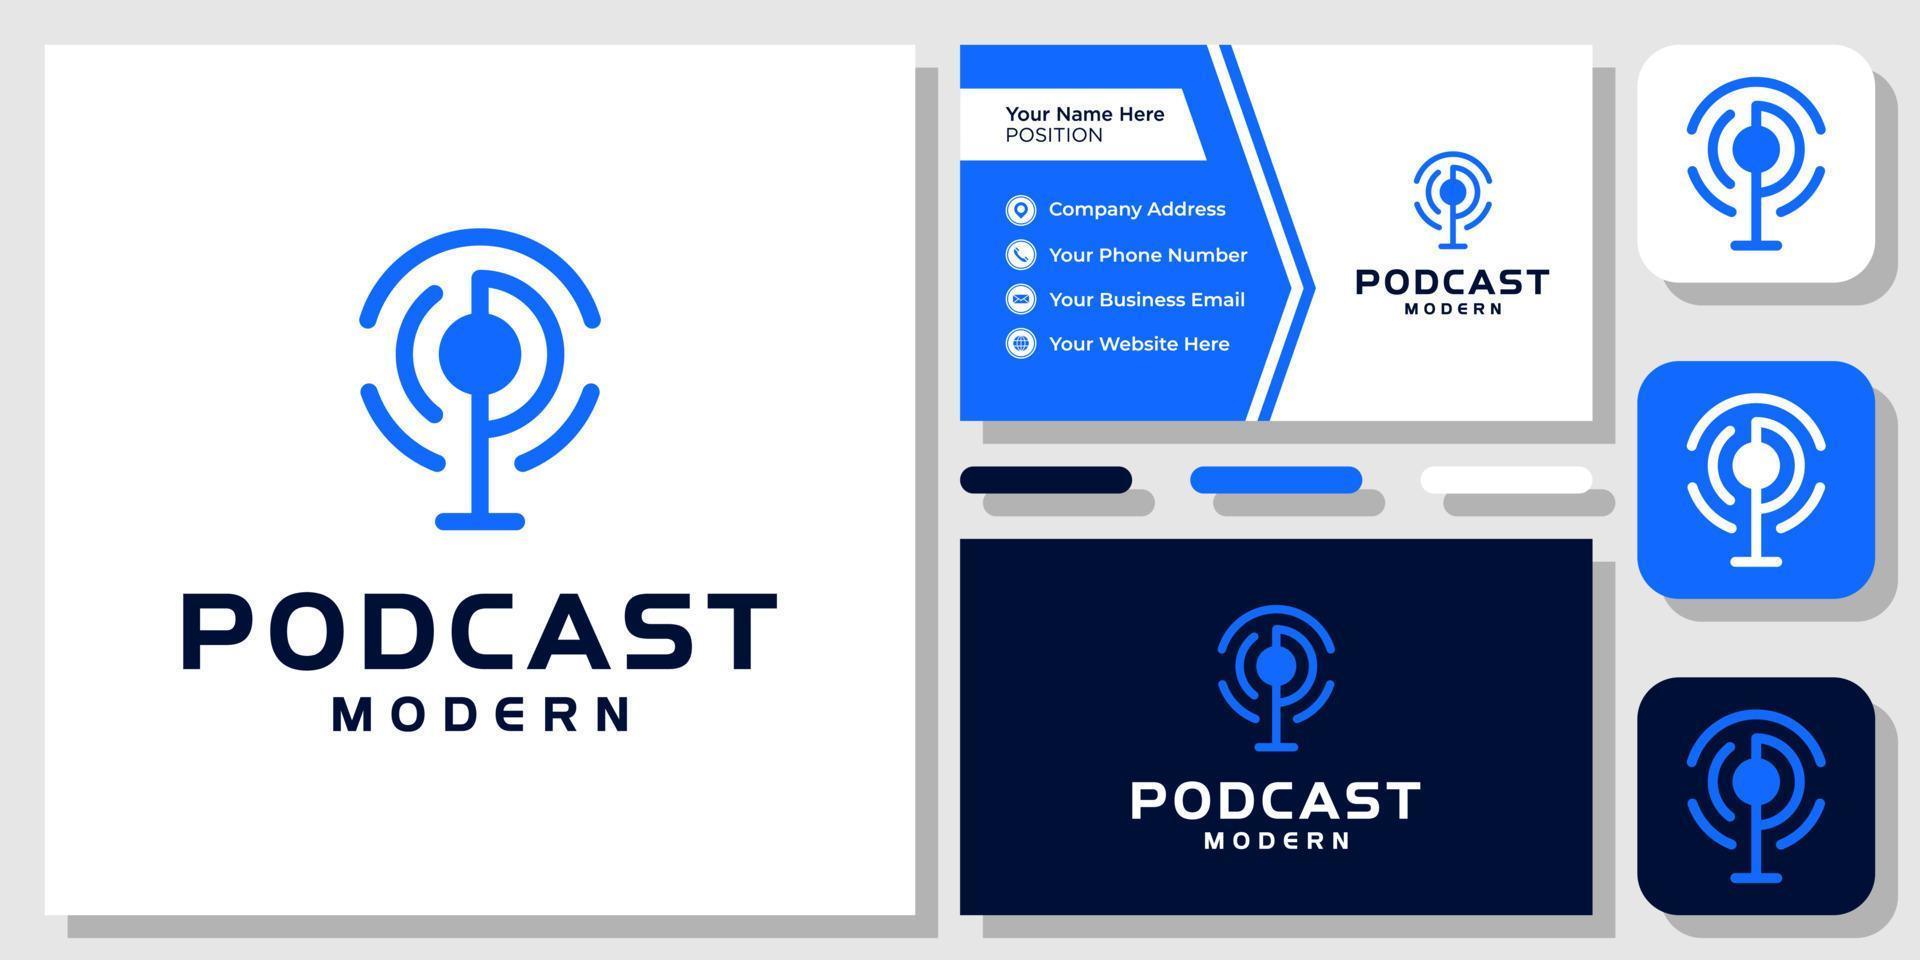 Podcast Modern Abstract Microphone Mic Broadcast Circle Icon Logo Design with Business Card Template vector